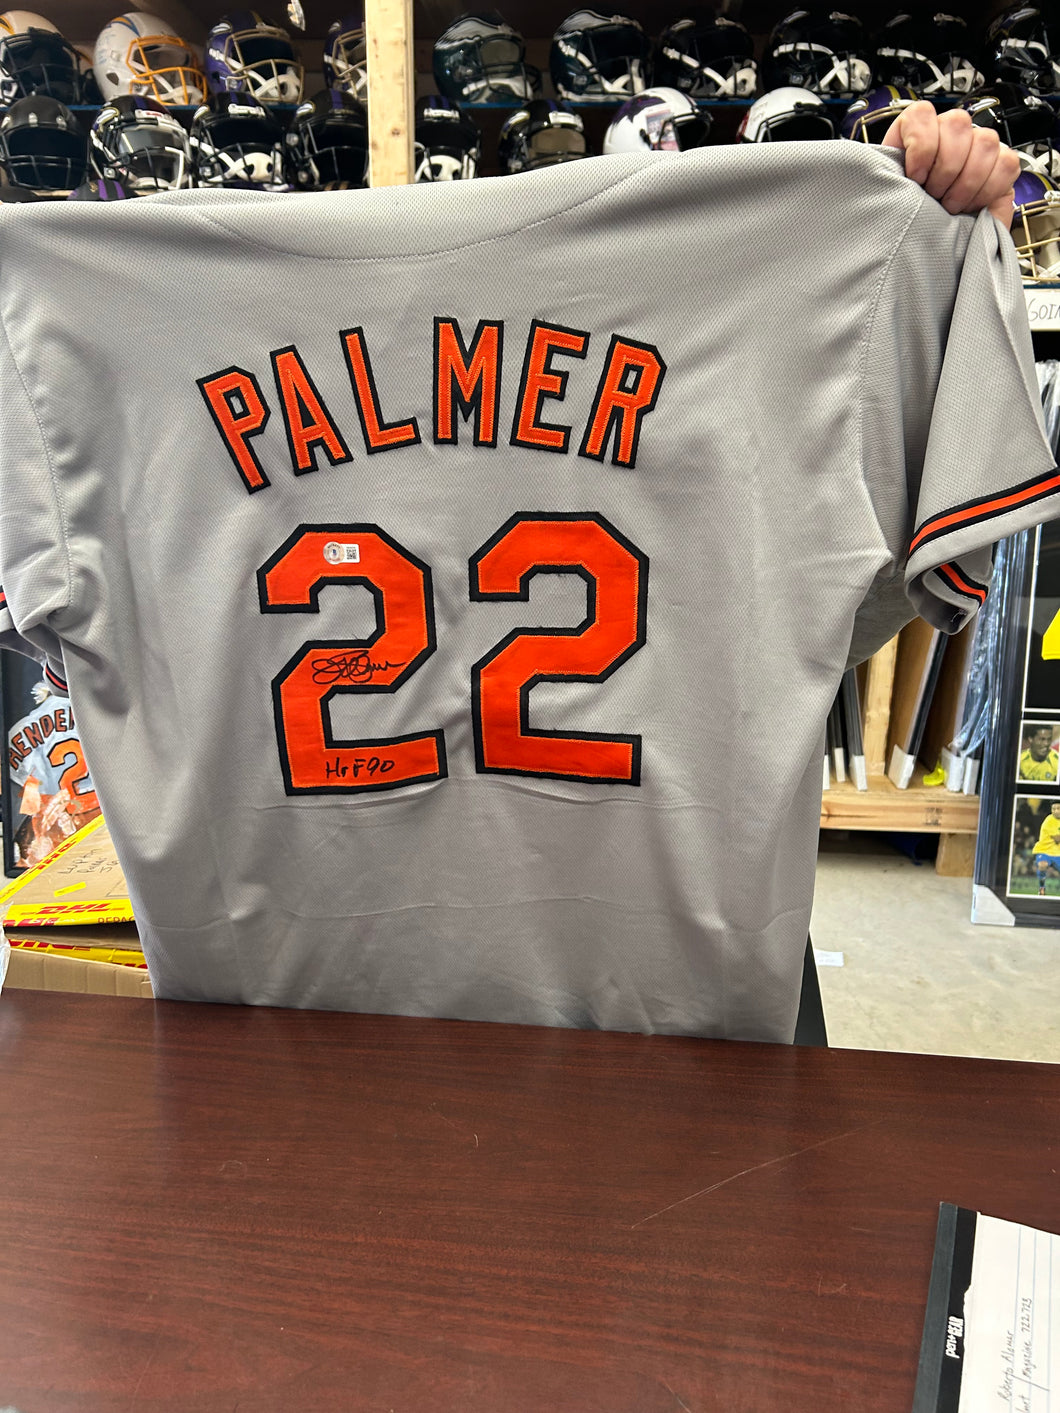 Jim Palmer signed jersey with hall of fame inscription